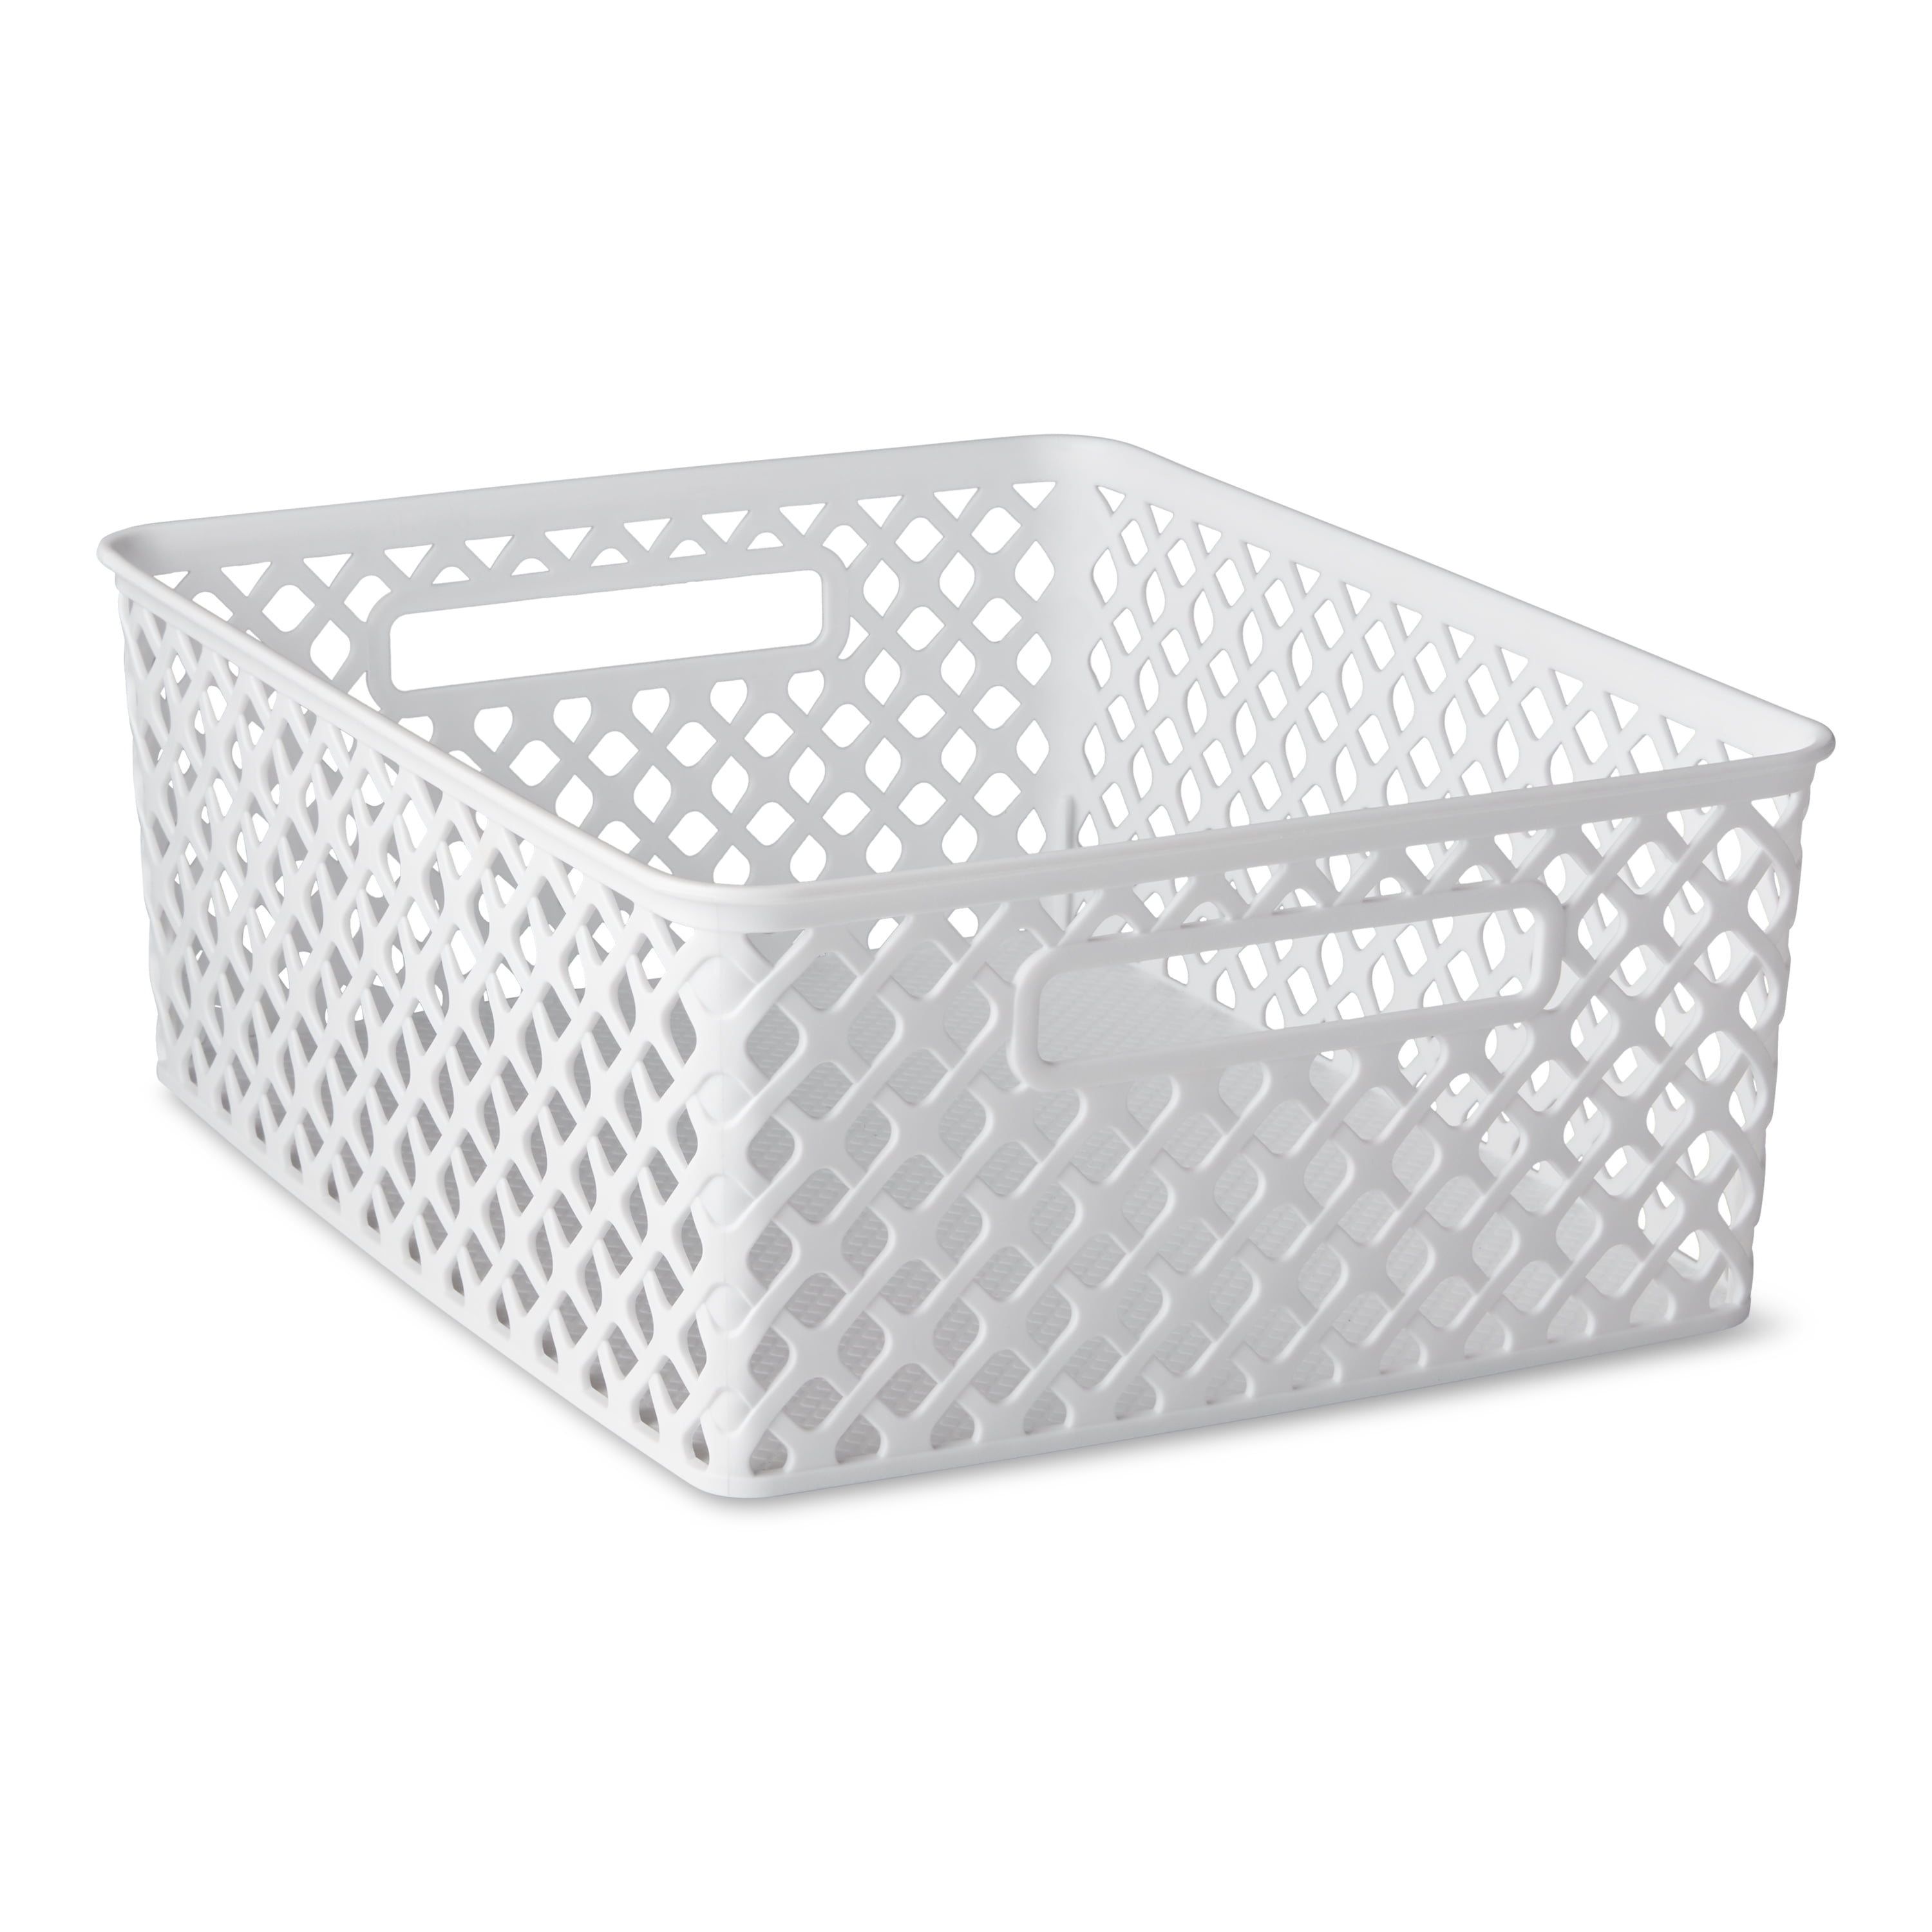 Small Plastic Basket Weave Tote, Gray, 10 x 7 inches